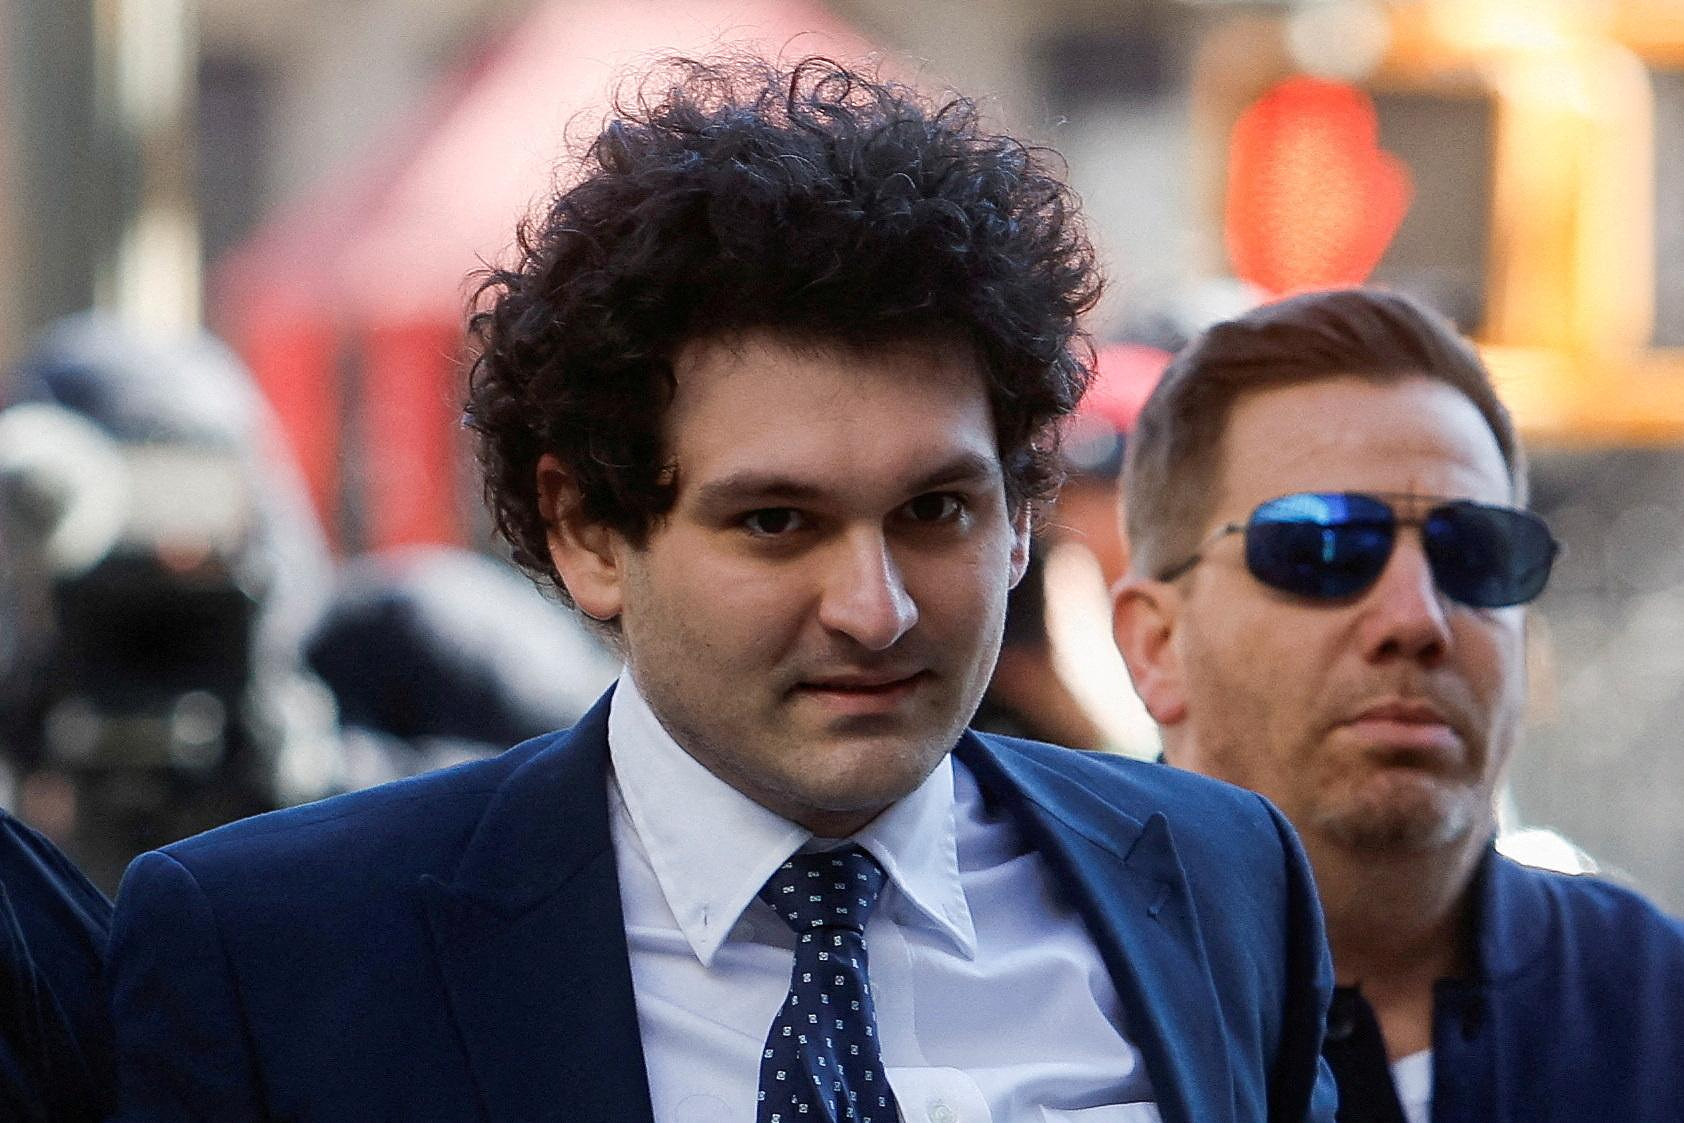 FTX trial: Sam Bankman-Fried, “the fallen king of cryptos”, set for his prison sentence this Thursday